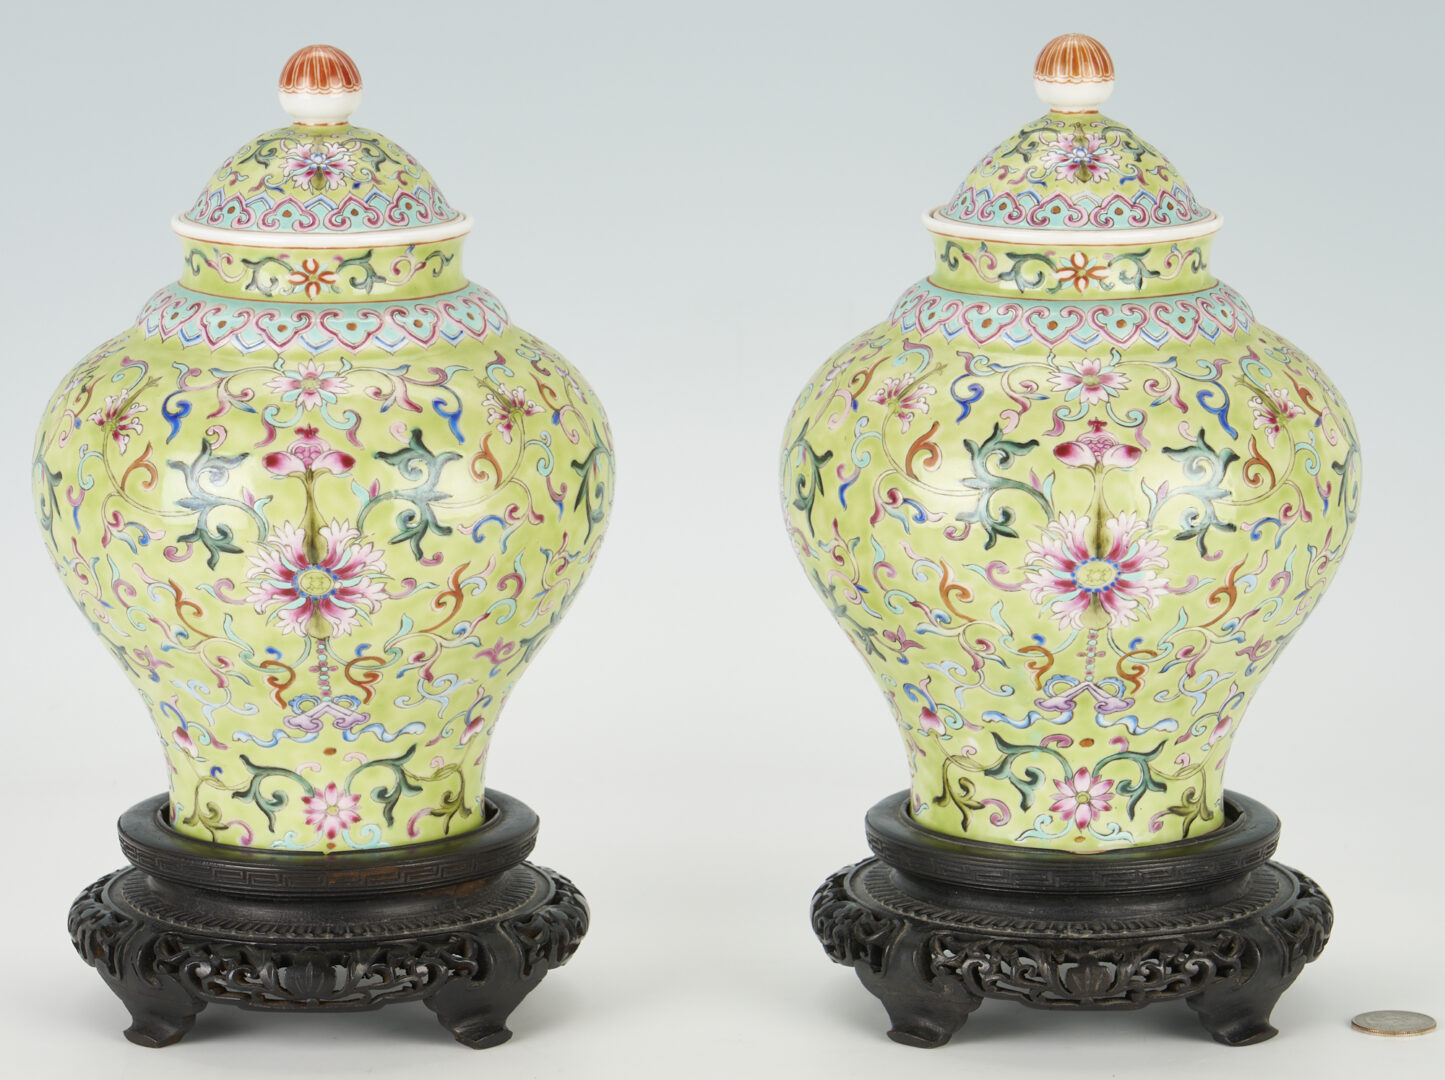 Lot 9: Pair of Chinese Lime Green Ground Famille Rose Jars